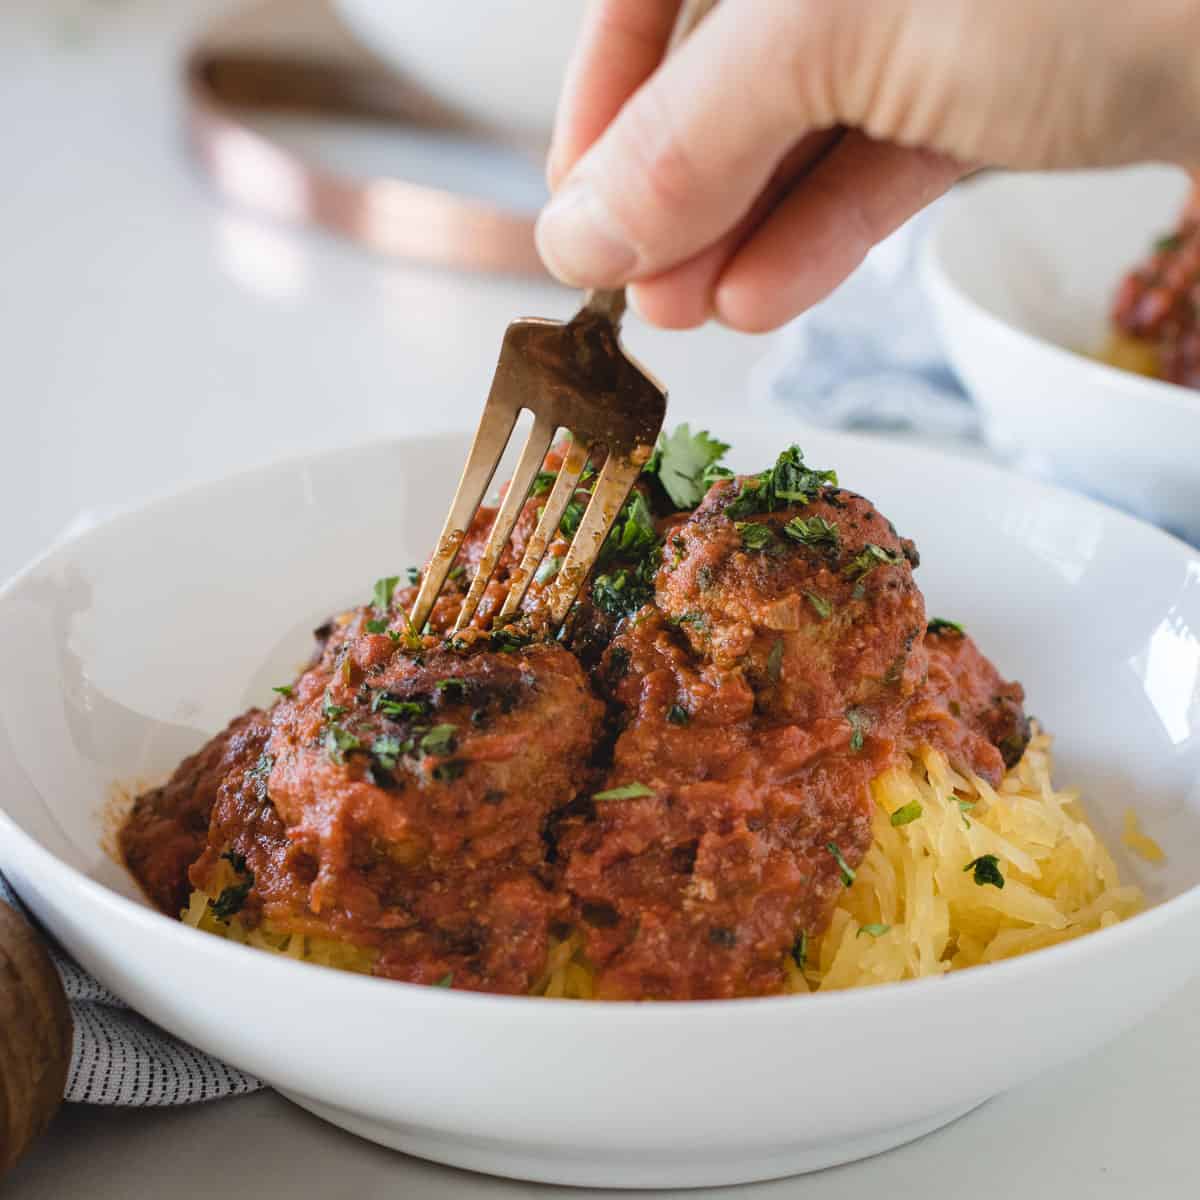 hand holding a fork stabbing into a bison meatball covered in red sauce in a white bowl